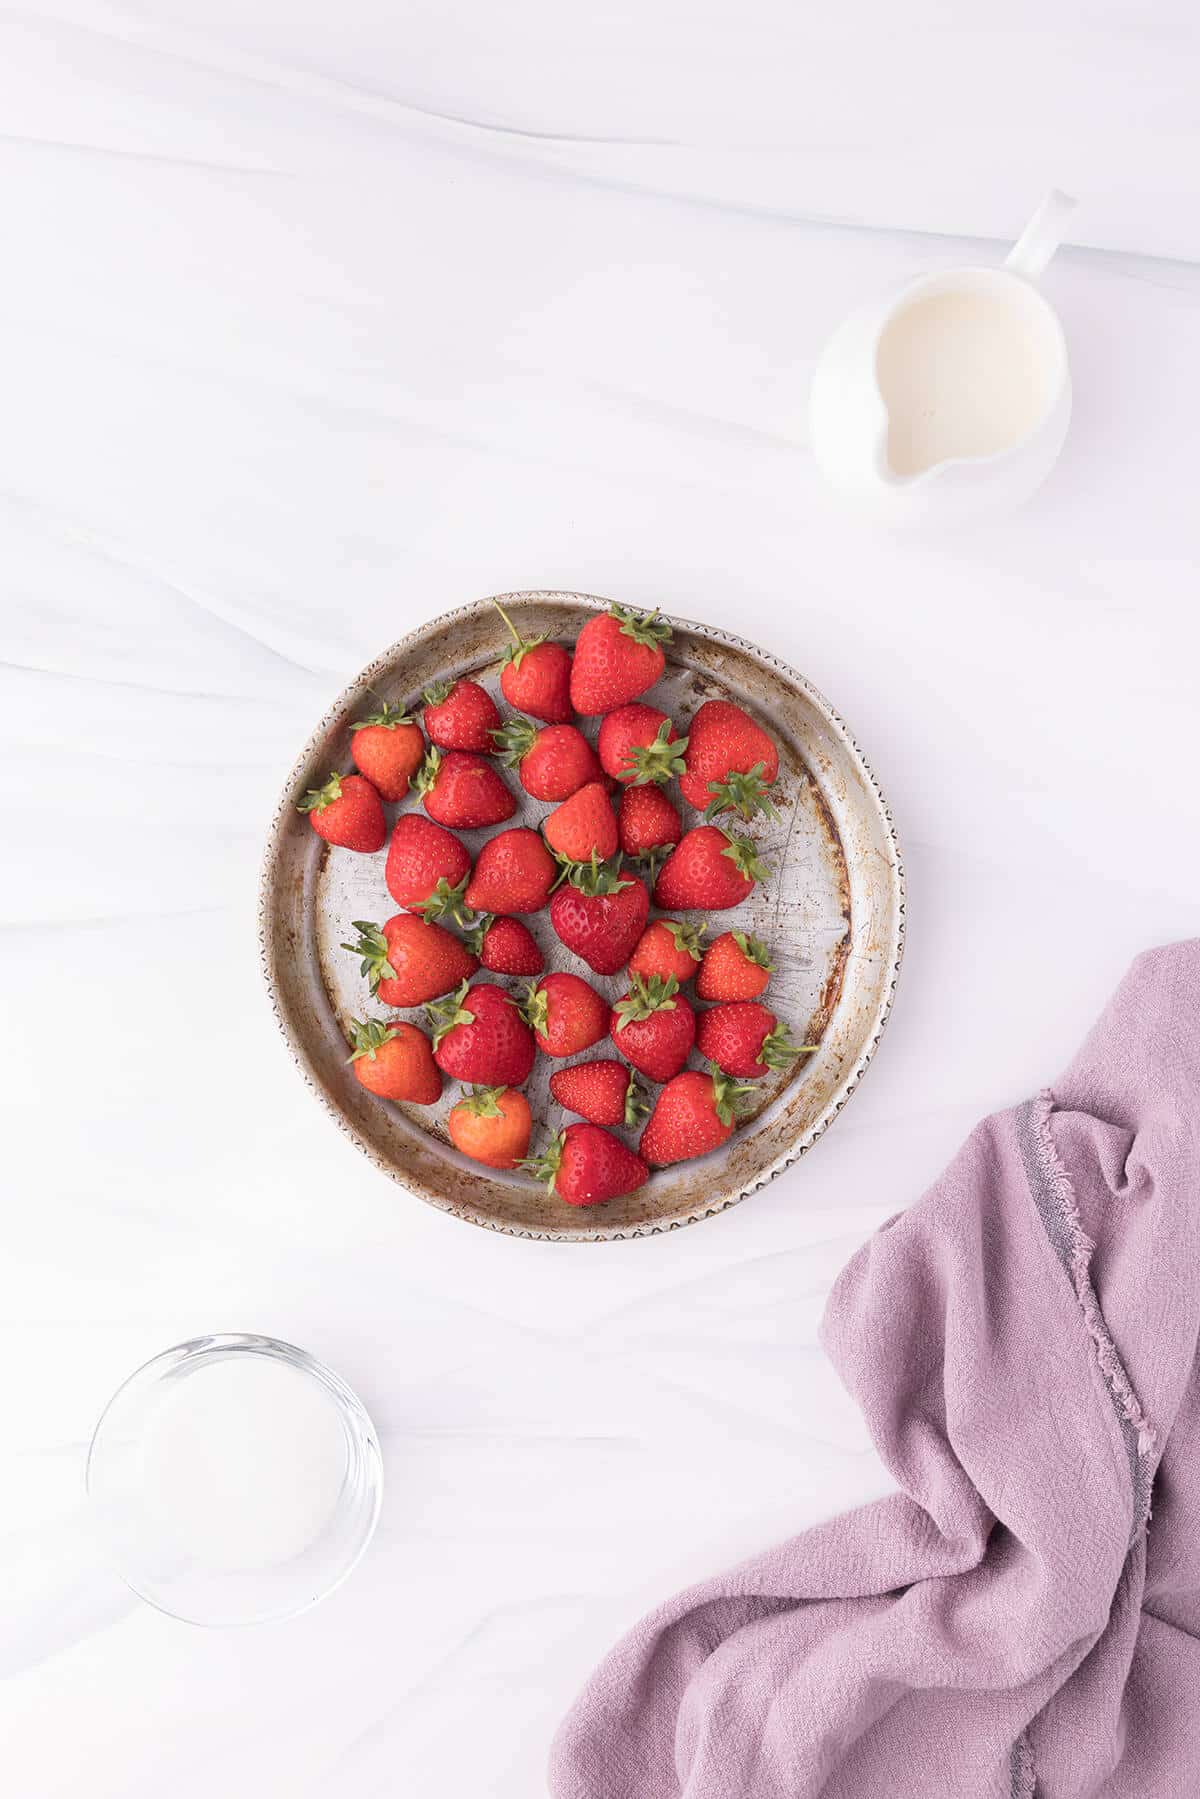 Plate filled with fresh strawberries